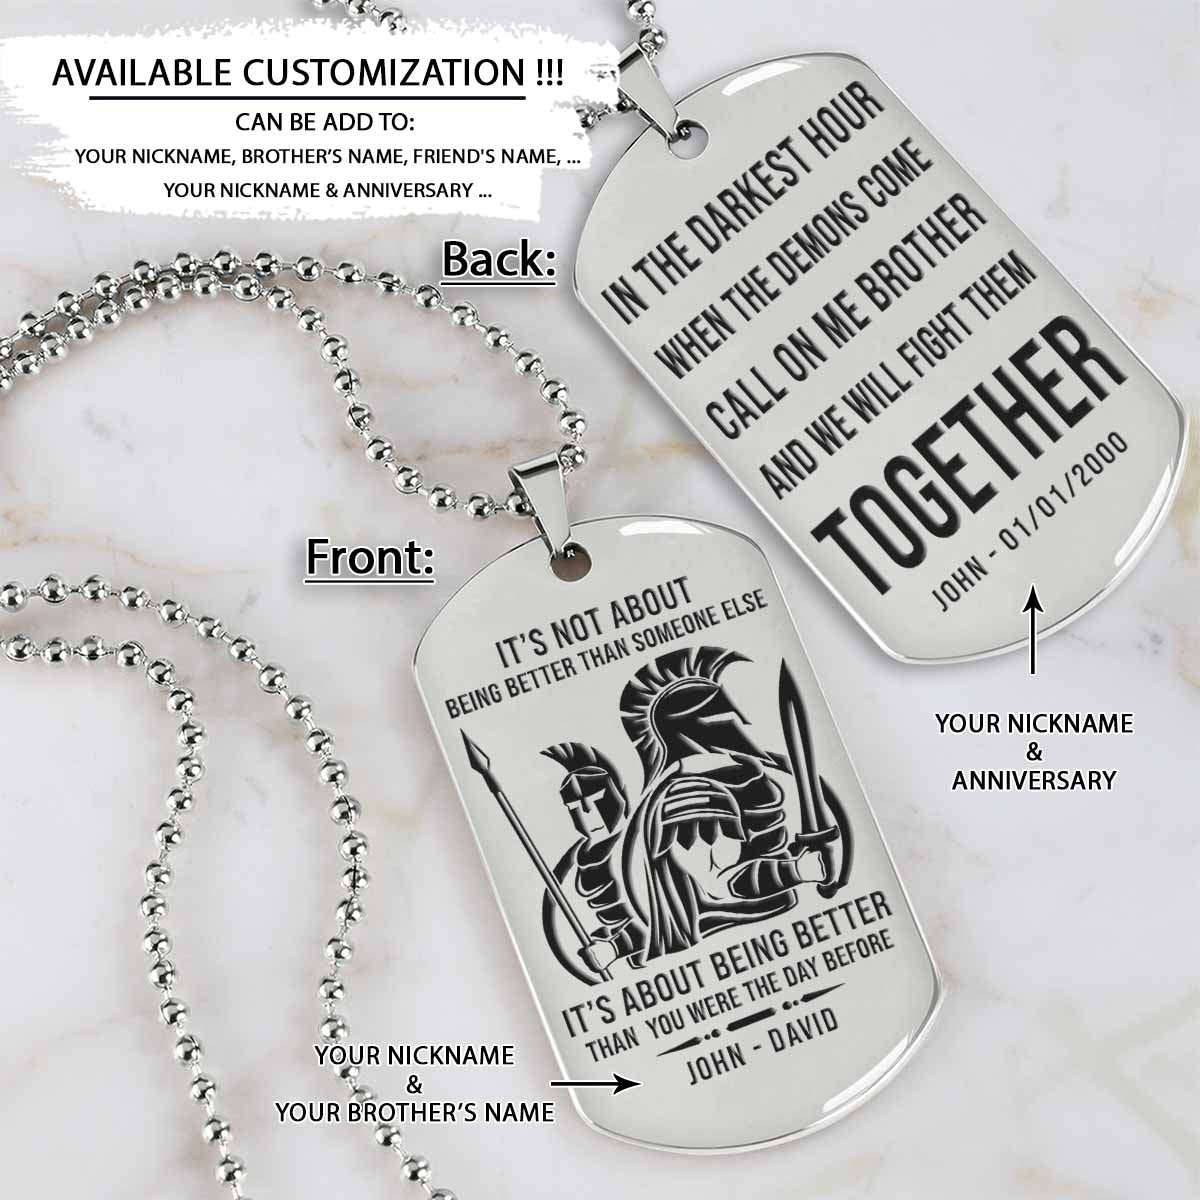 WAD060 - Call On Me Brother - It's Not About Being Better Than Someone Else - Warrior - Spartan Necklace - Engrave Silver Dog Tag